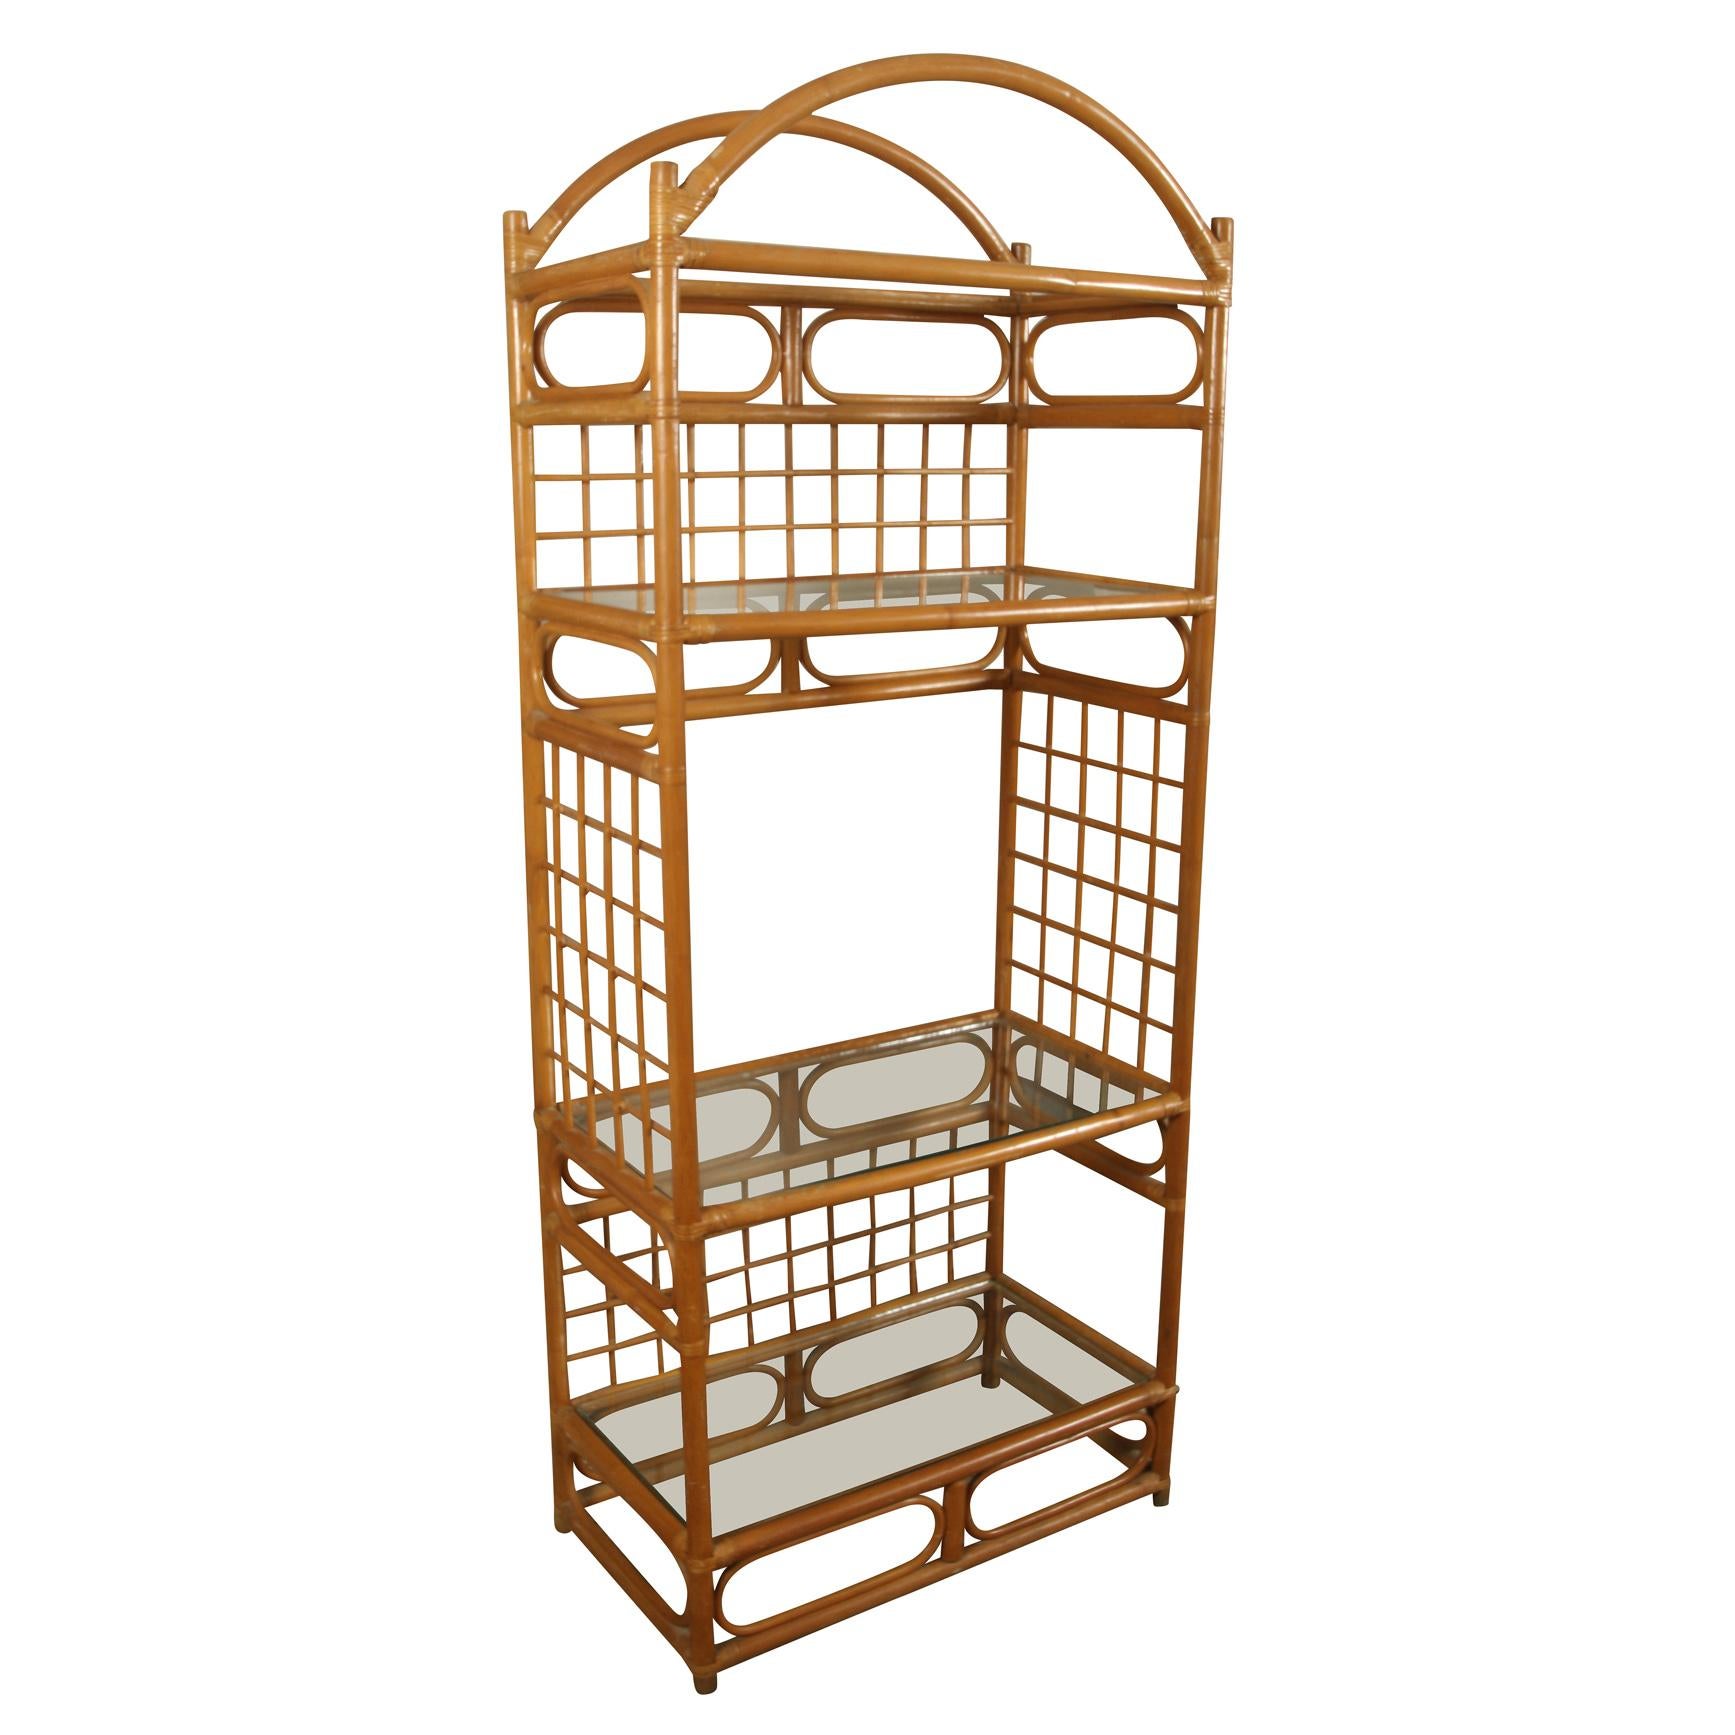 A stylish pair of faux bamboo étagères with four glass shelves. Well constructed and sturdy, this versatile pair provides is great for storage and display in any room!